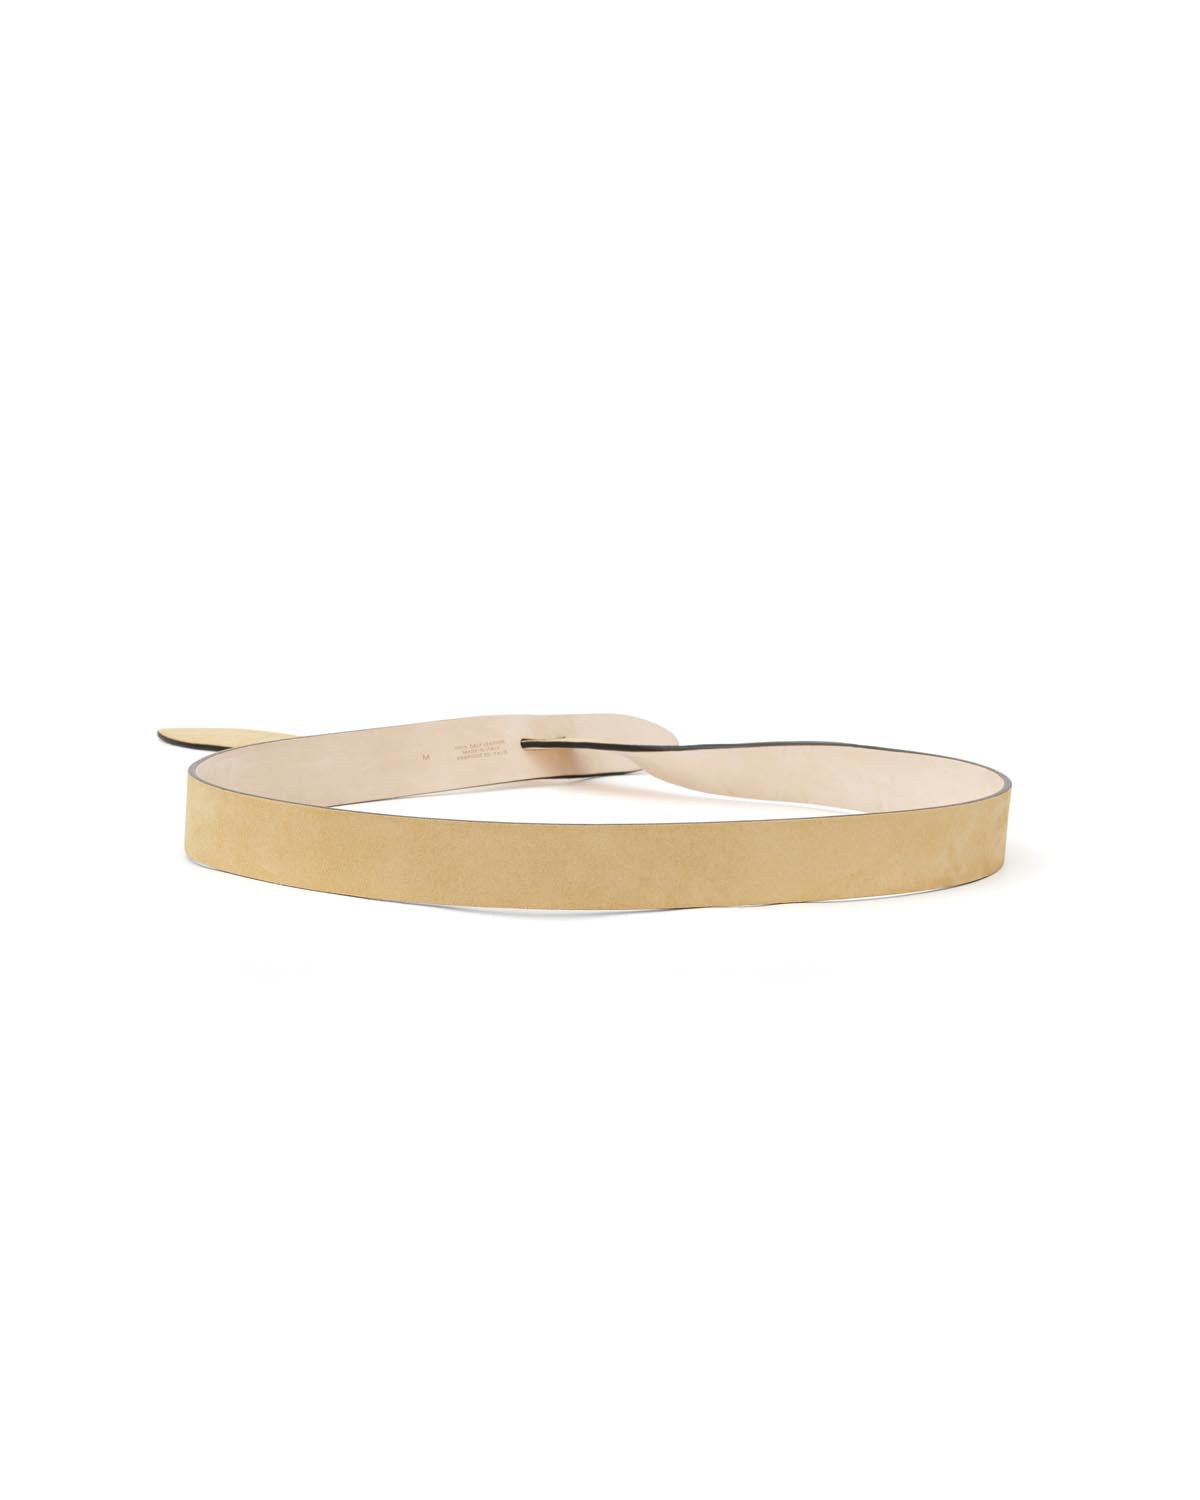 Lecce belt Woman Toffee 2